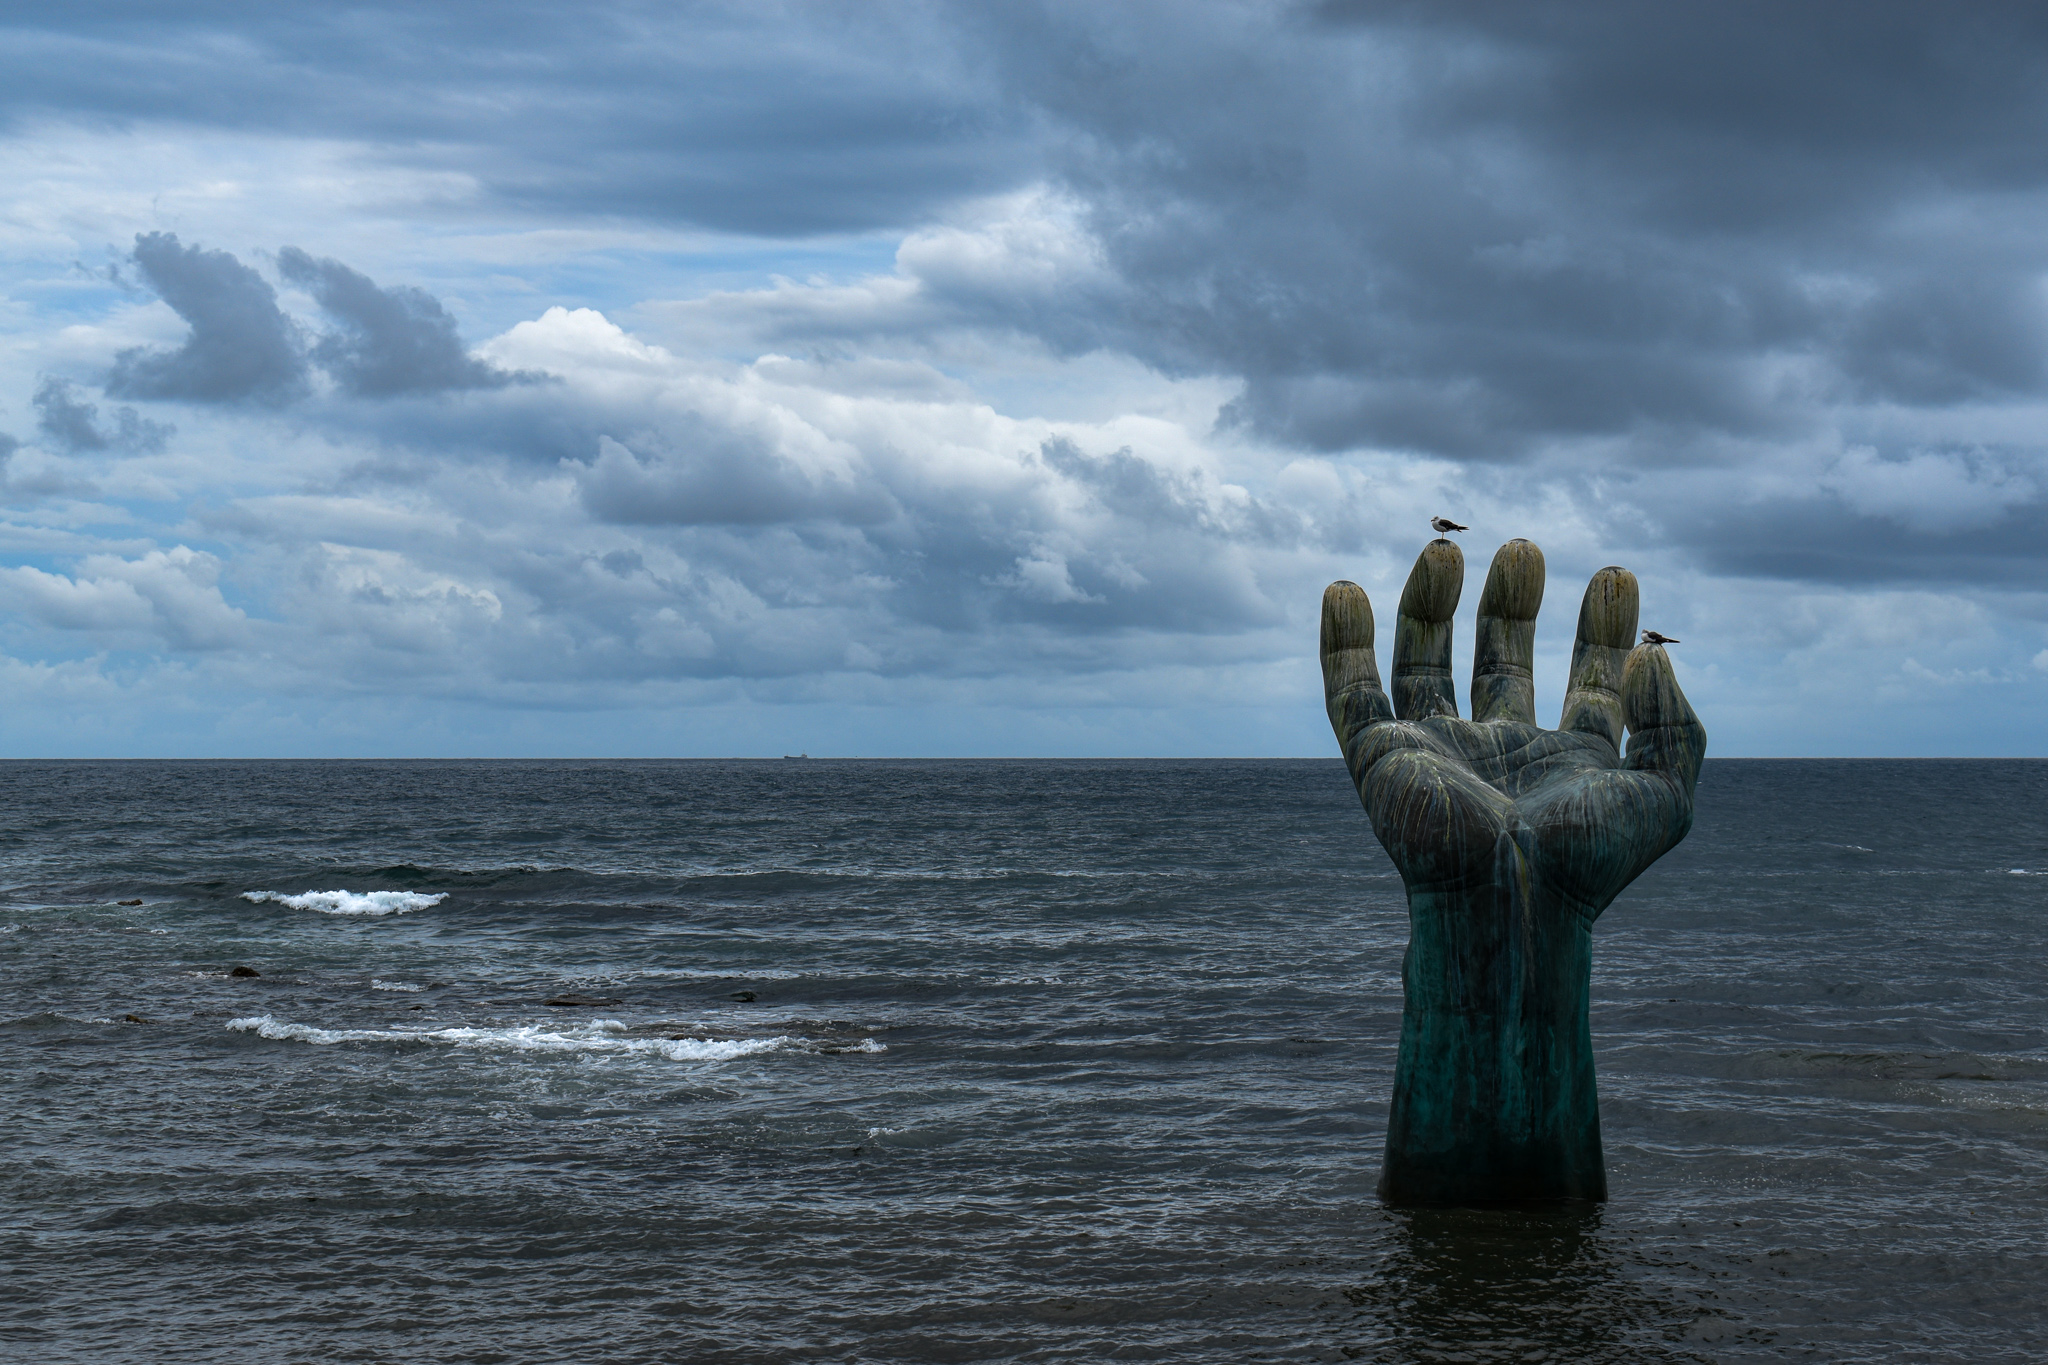 a hand sculpture in the middle of the ocean in south korea homigot hands of harmony pohang dark stormy ocean cloudy ominous sky